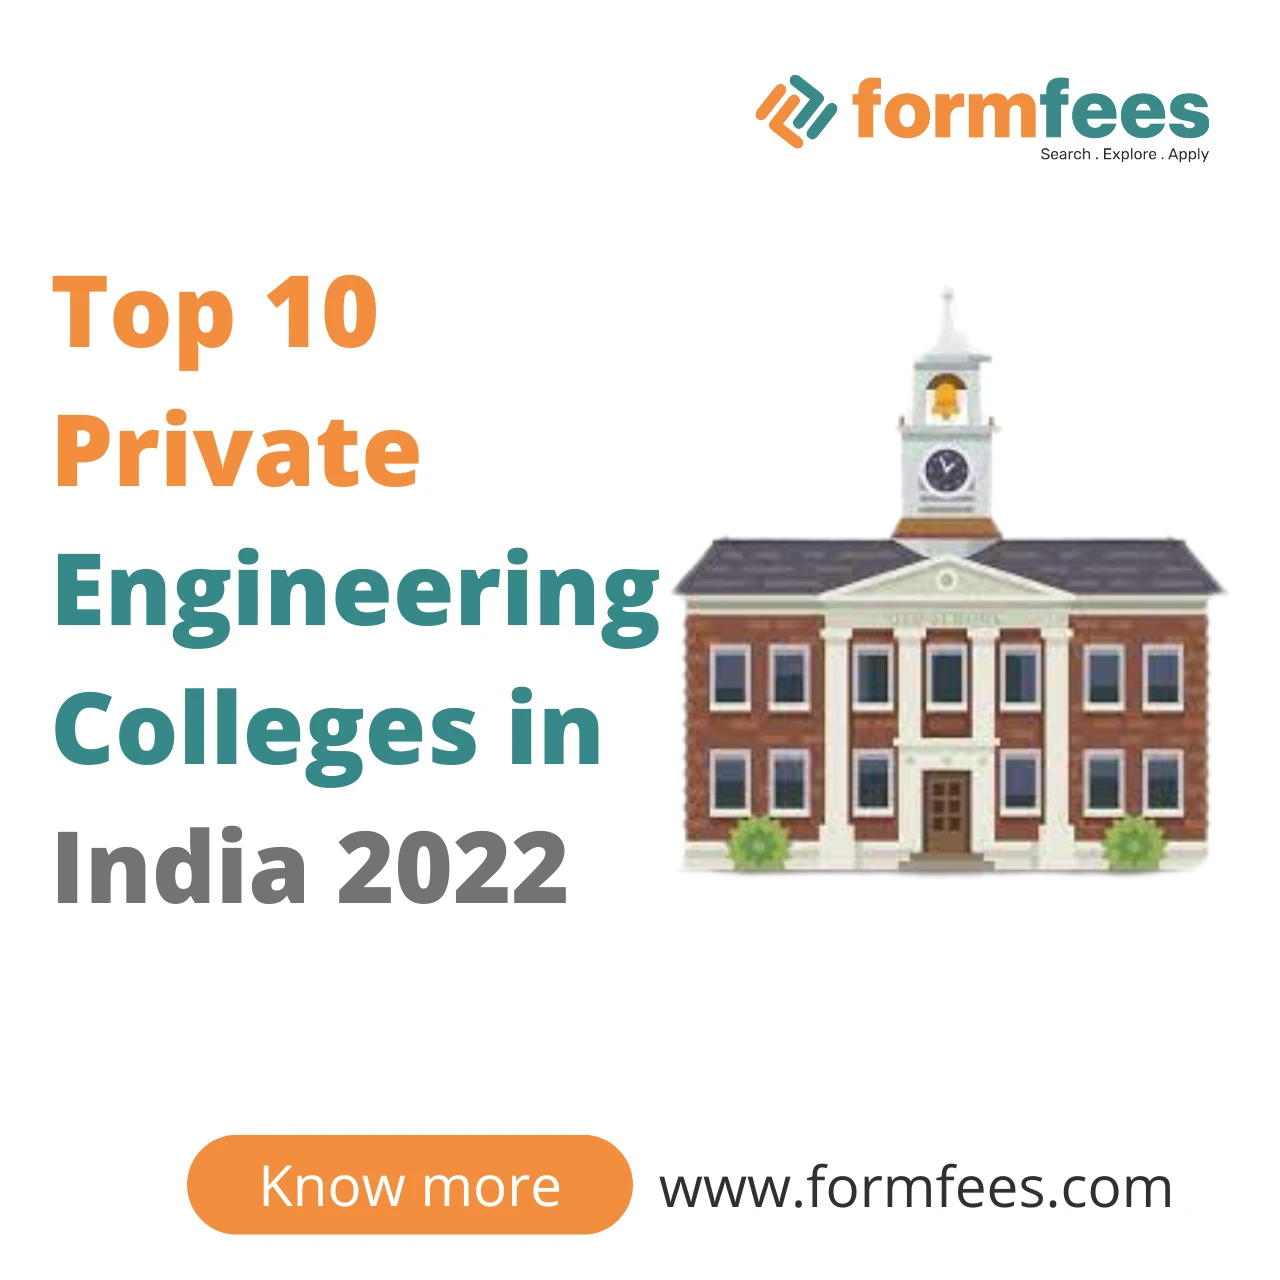 Top 10 Private Engineering Colleges In India 2022.webp